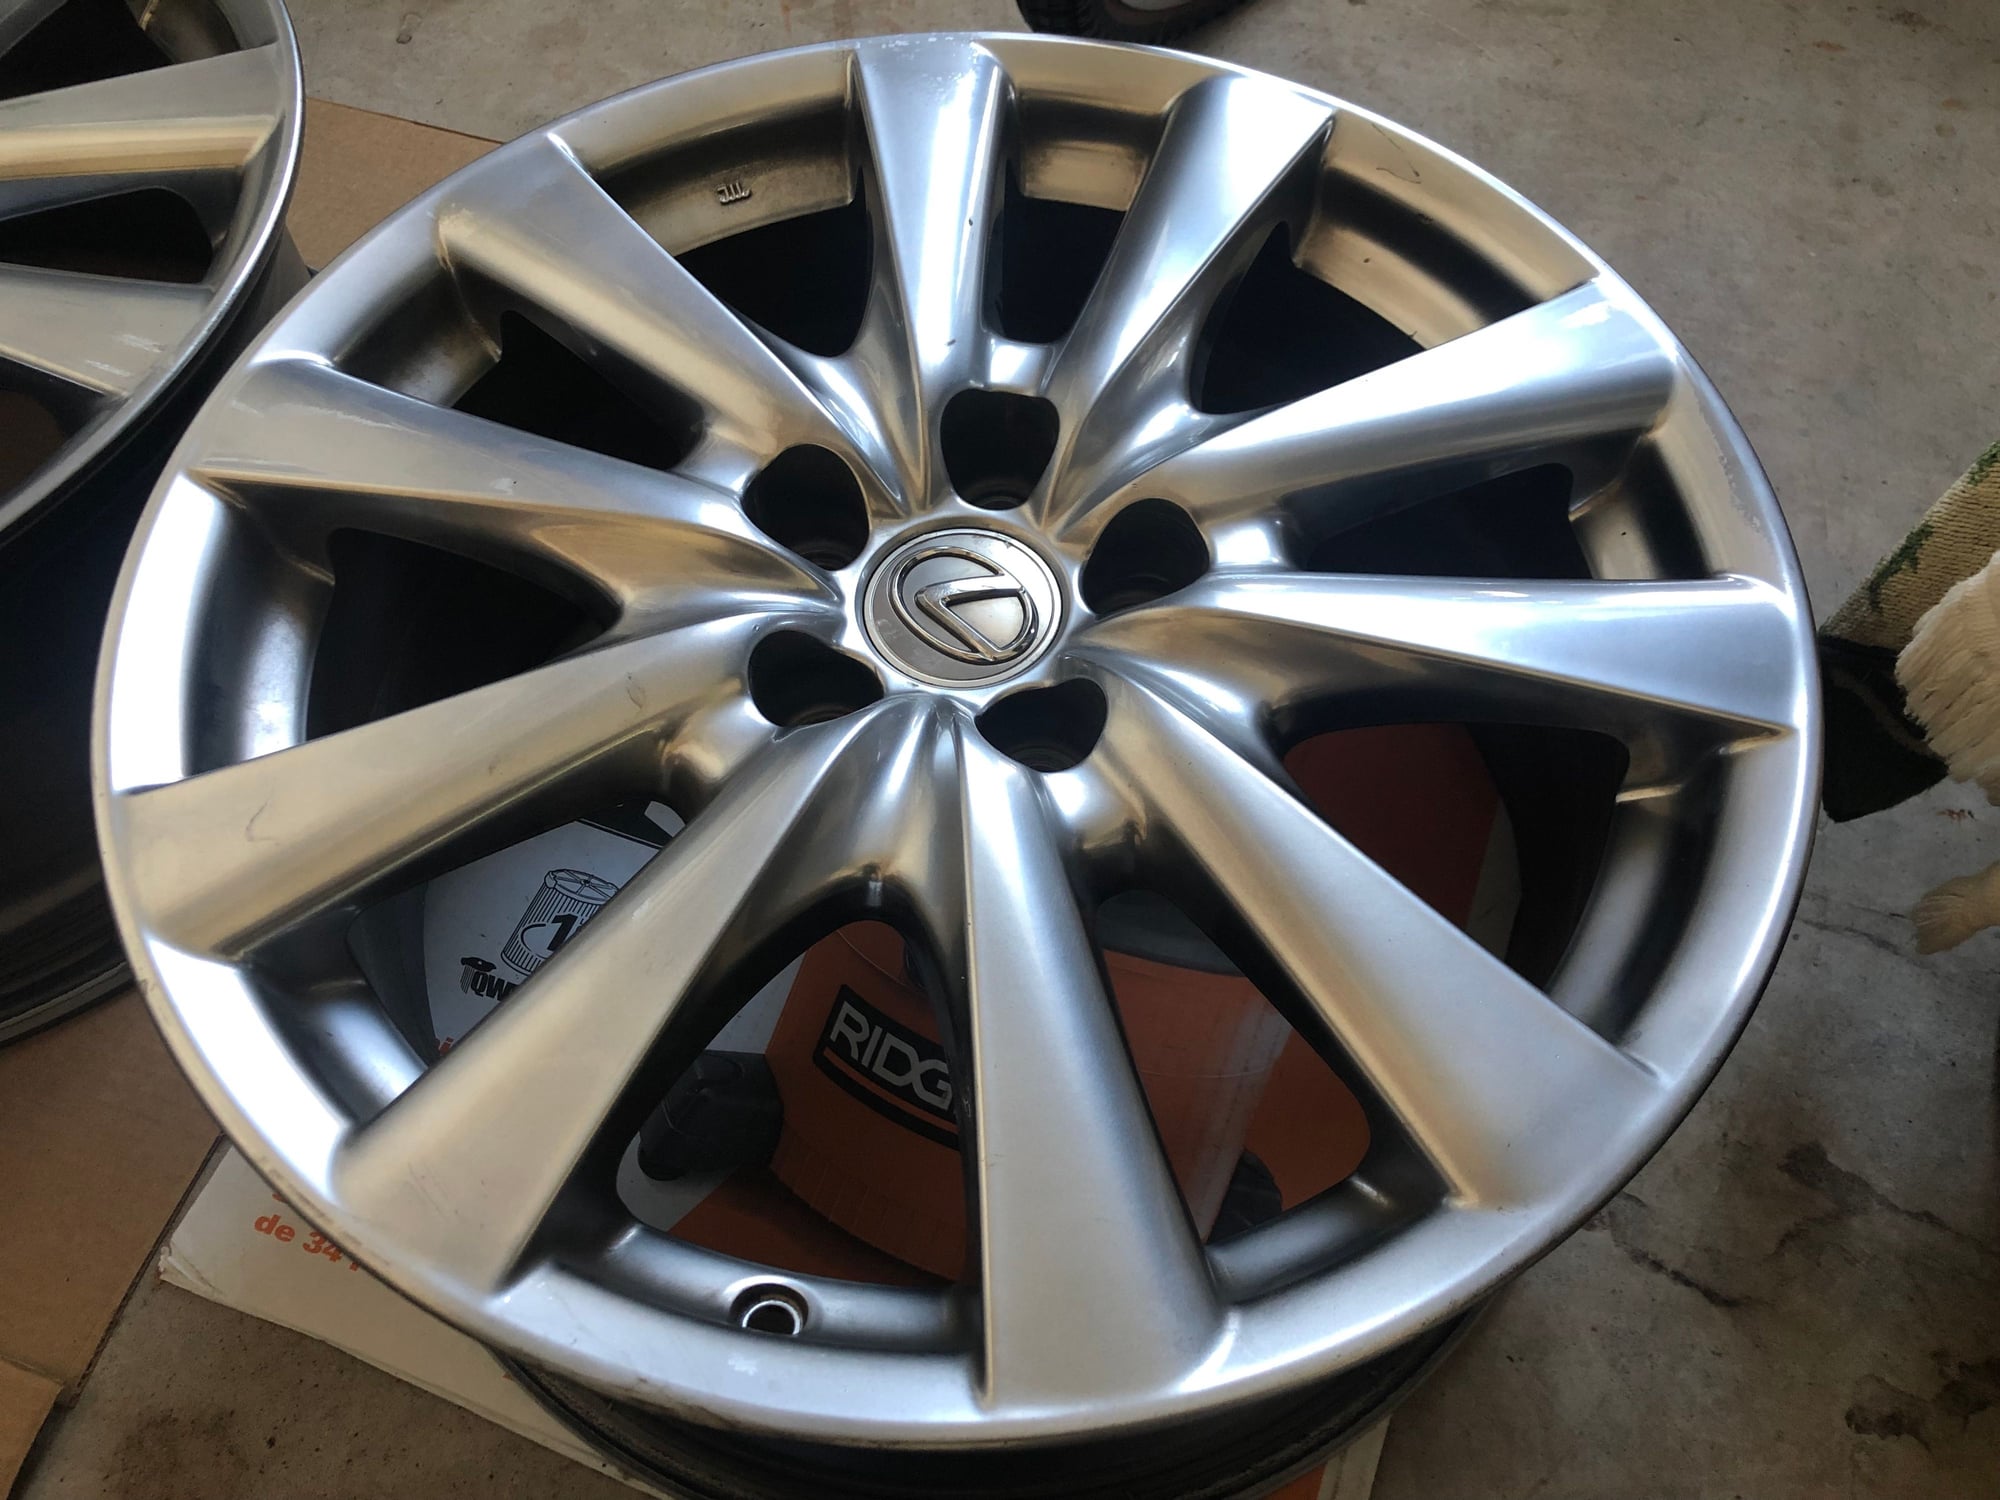 Wheels and Tires/Axles - 2013-2015 OEM Lexus GS350 450h 18" x 8" Wheels - Set of 4 - Used - 2013 to 2015 Lexus GS350 - 2013 to 2015 Lexus GS450h - Clifton, VA 20124, United States